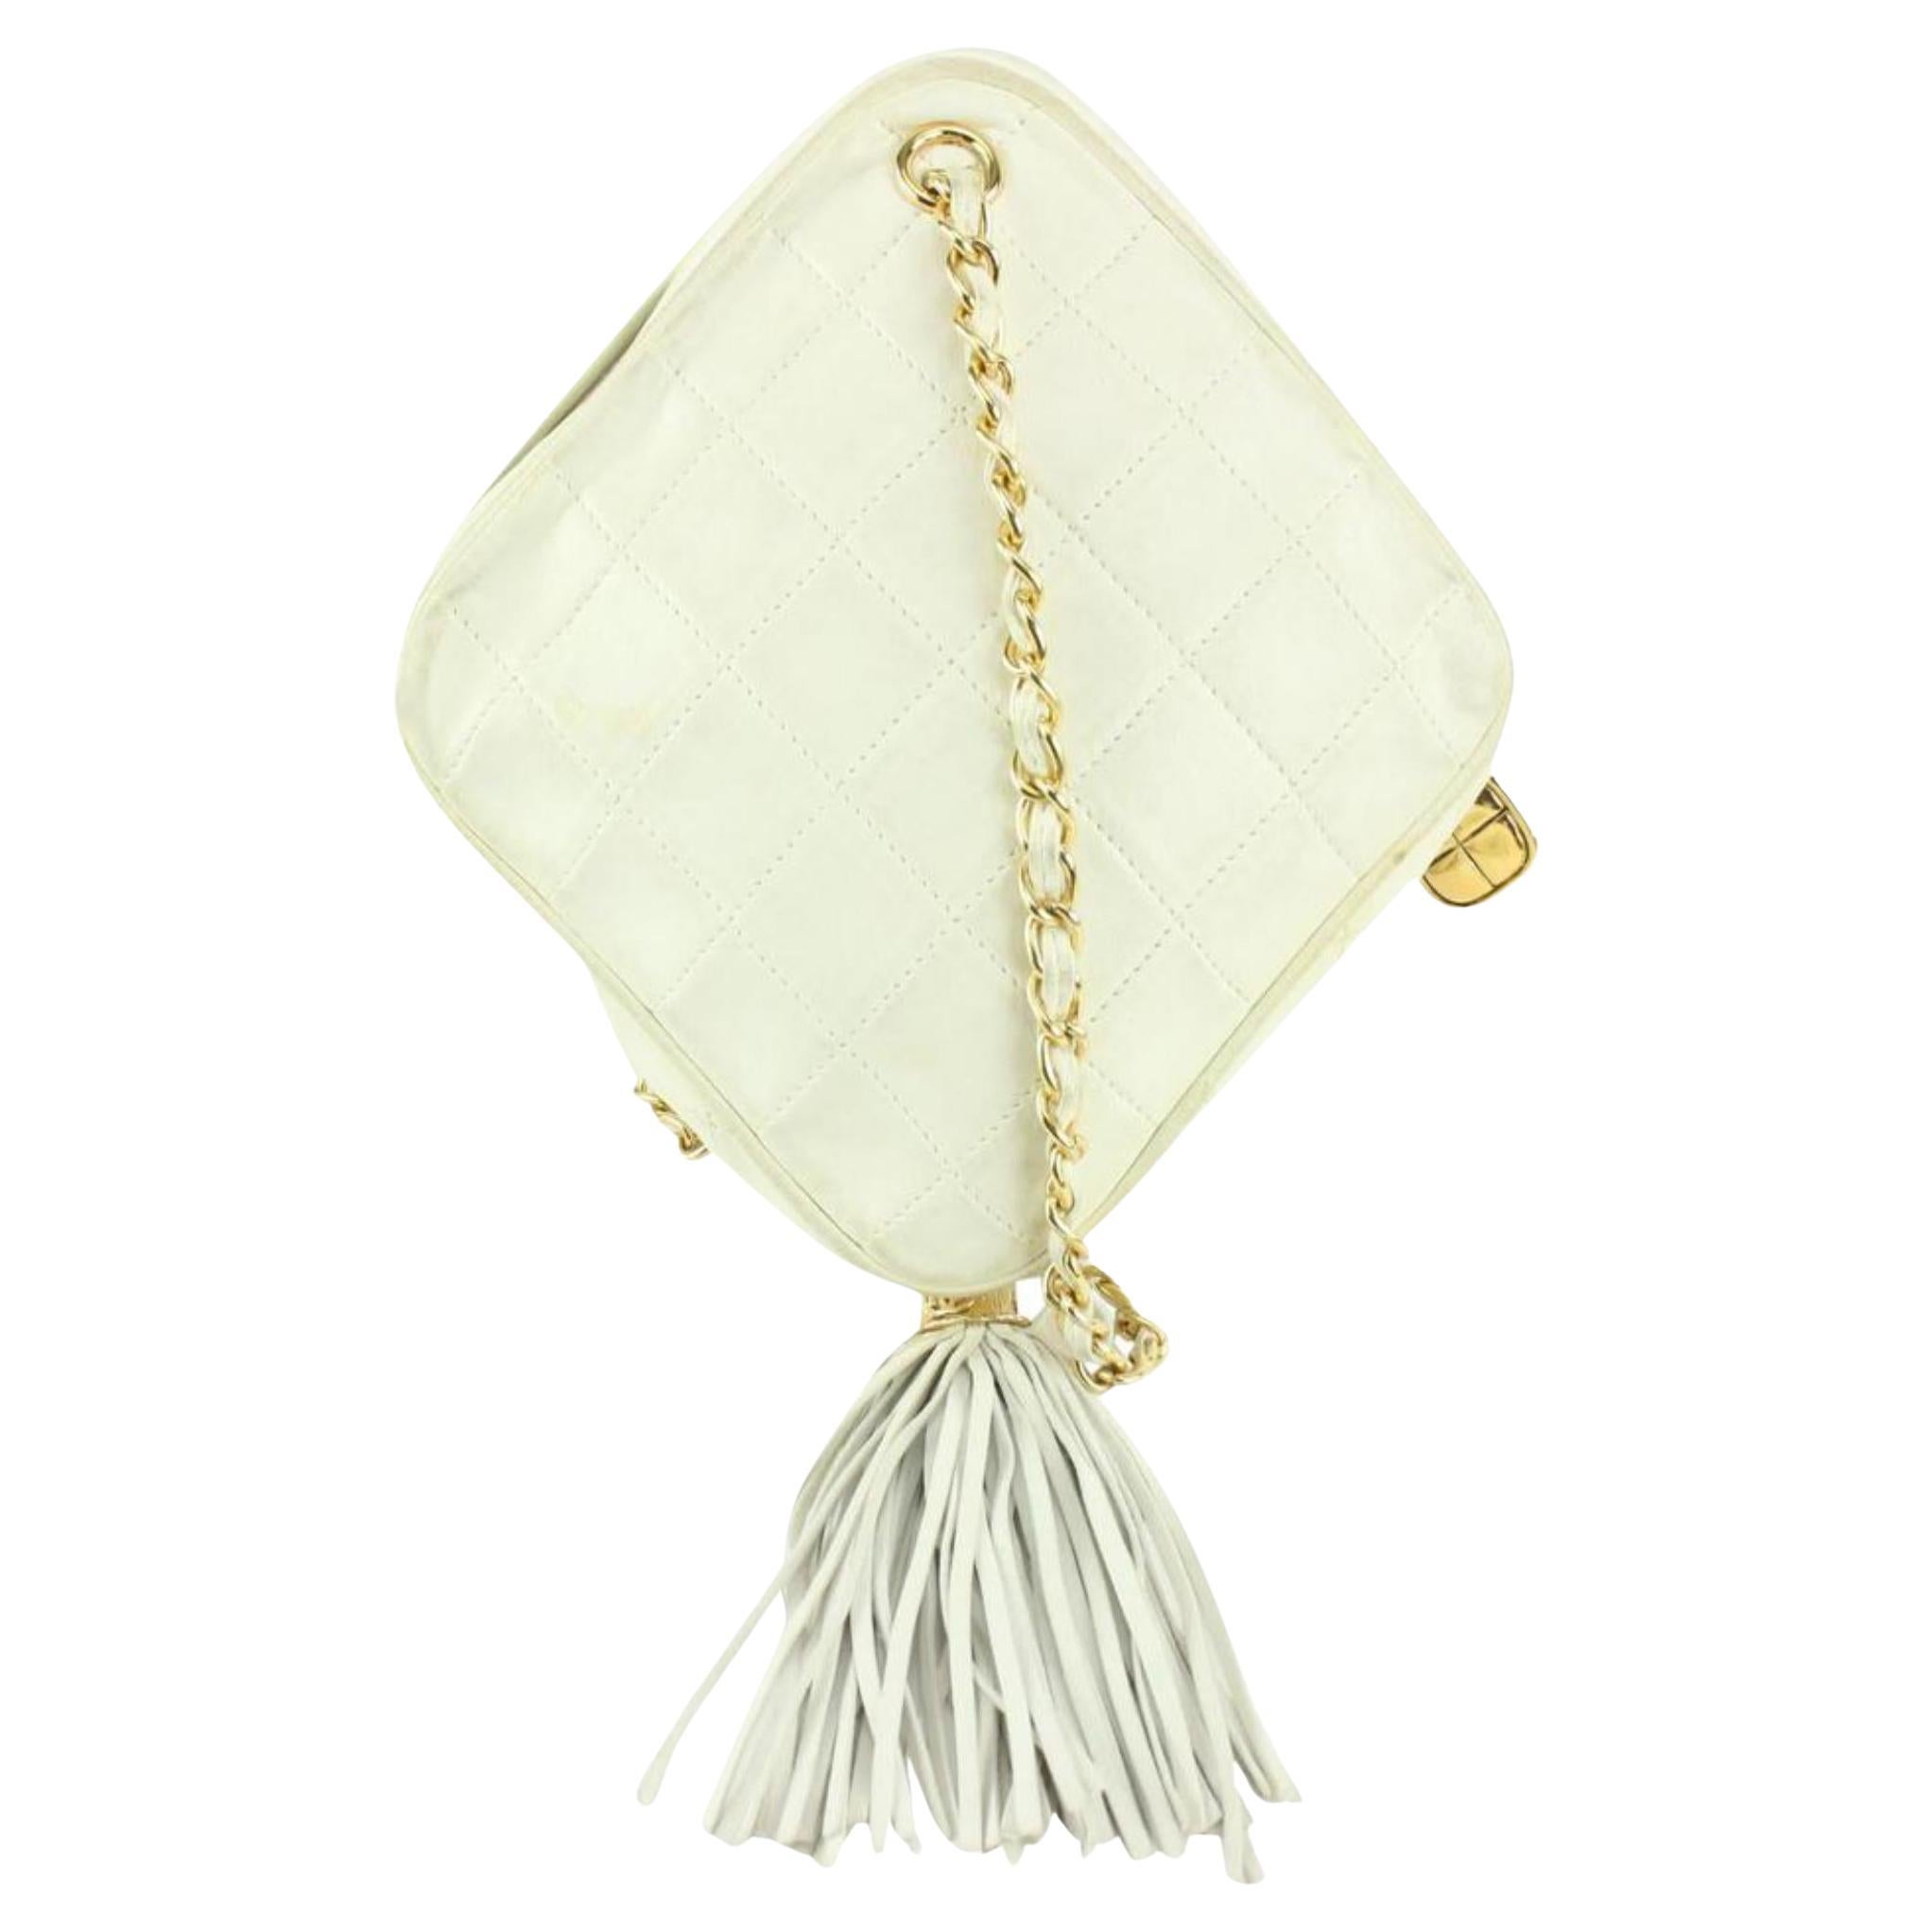 Chanel White Quilted Leather Diamond Clutch on Chain Tassel Bag 1123c30 For Sale